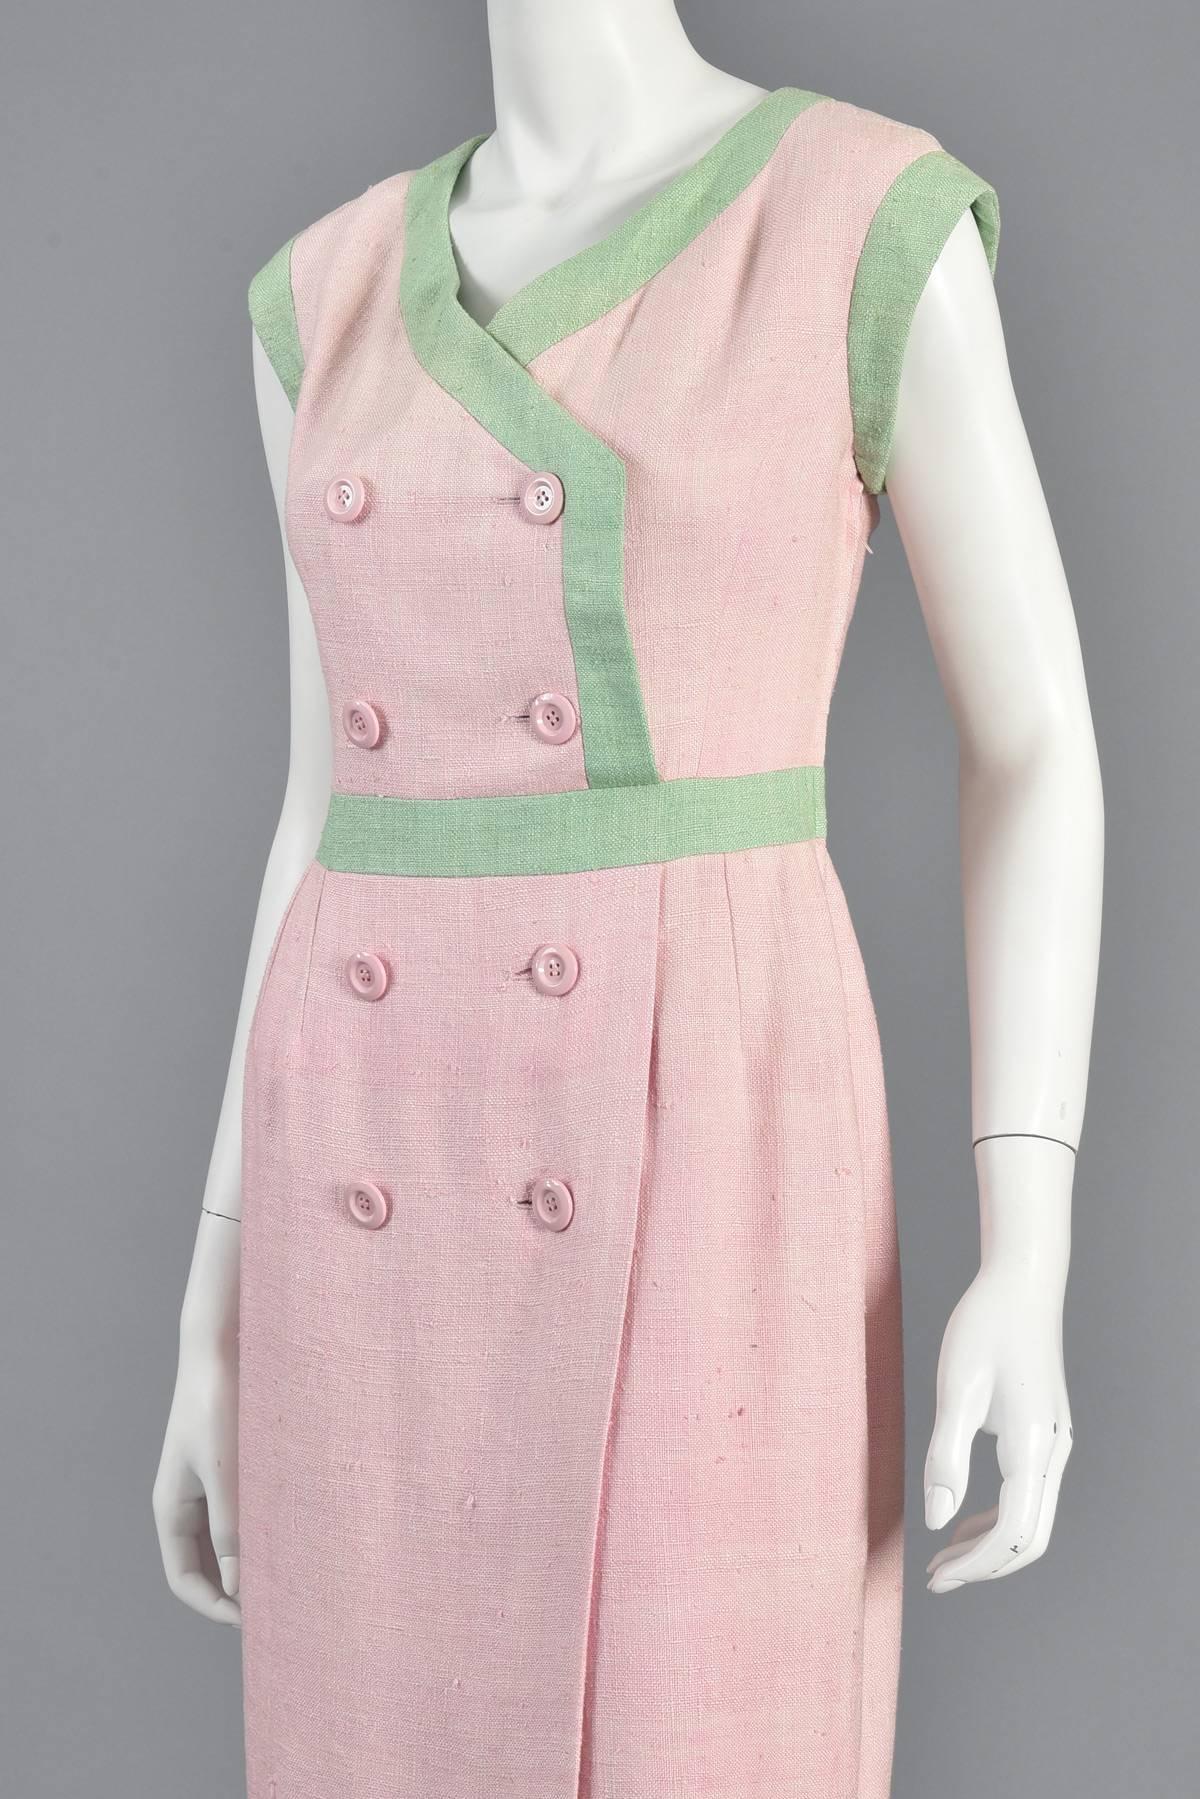 1980s Valentino Watermelon Double Breasted Linen Dress  For Sale 3